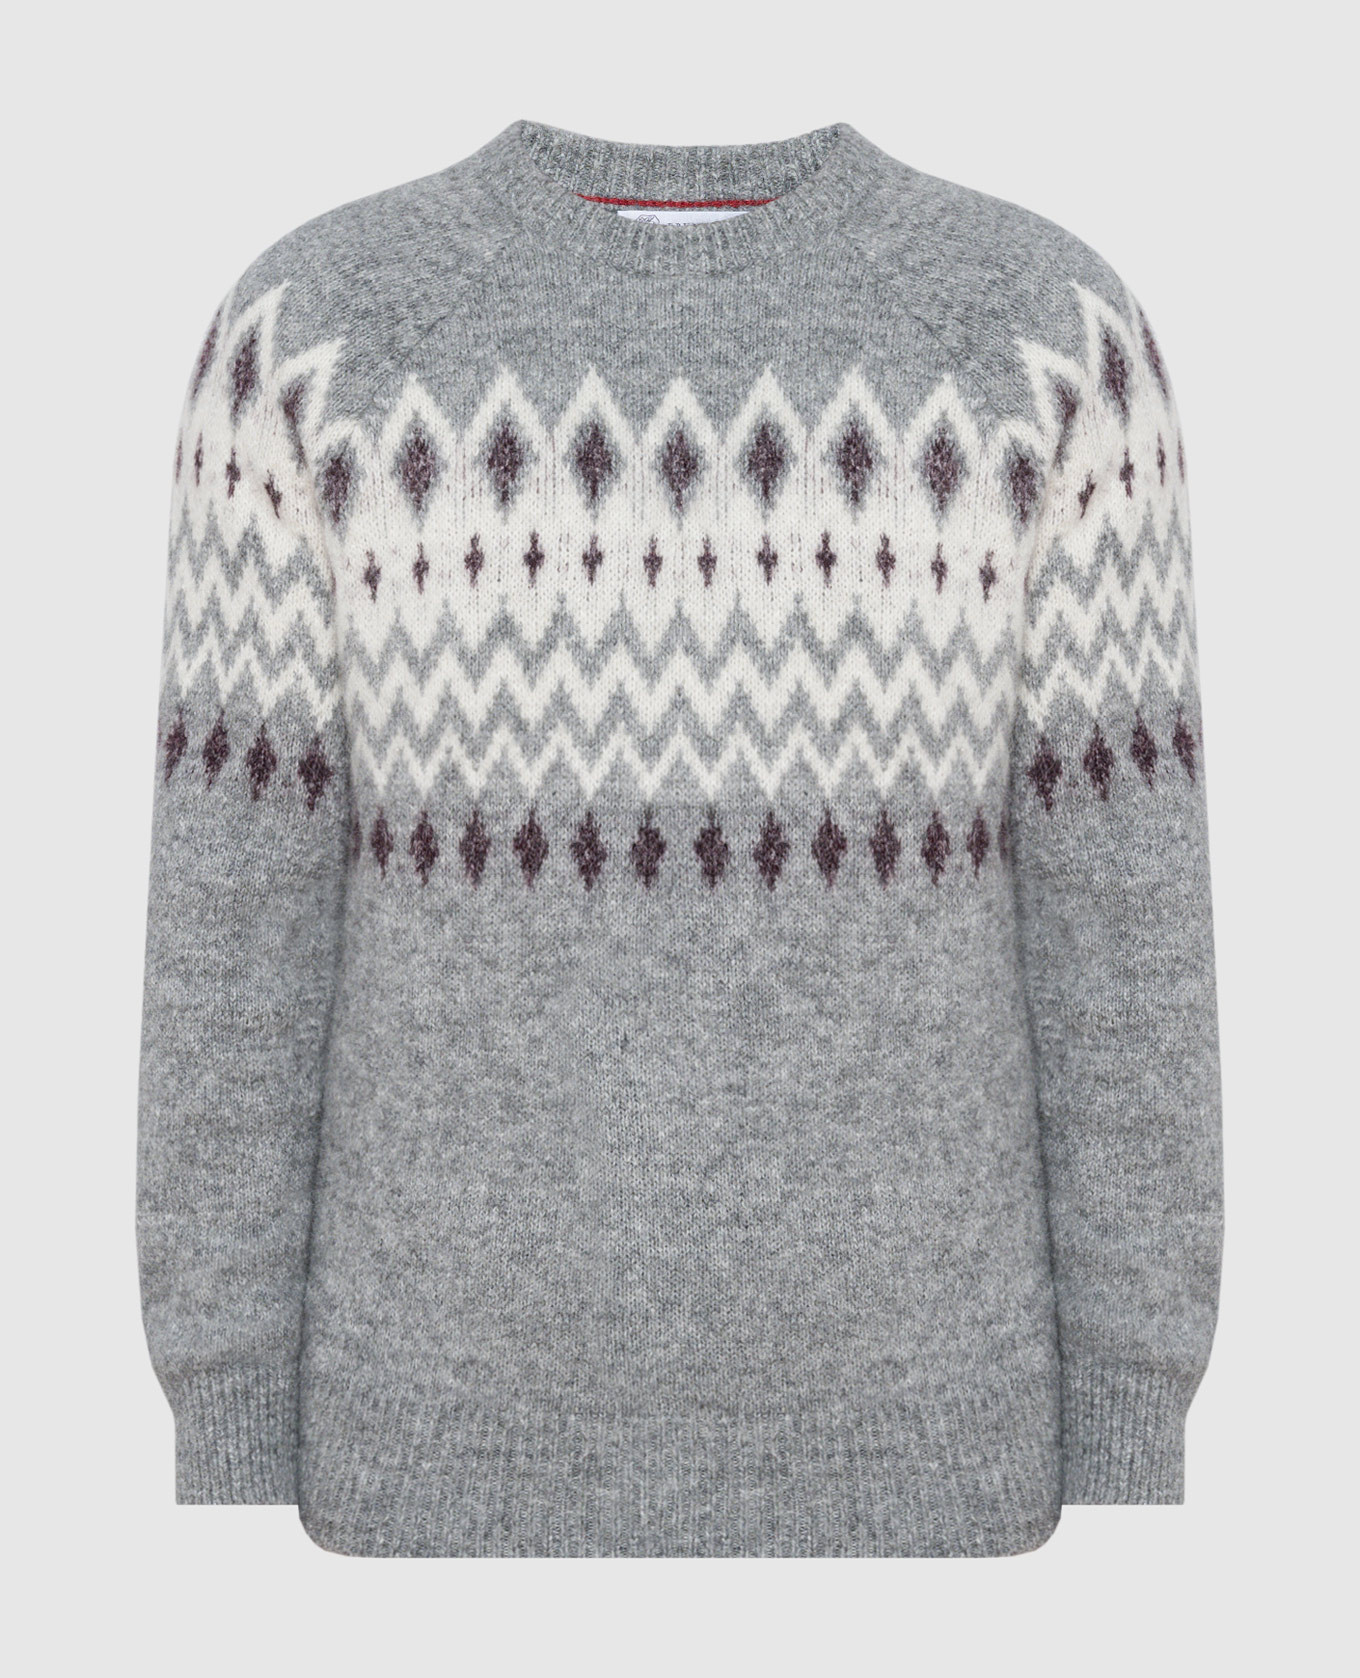 Gray sweater with a geometric pattern